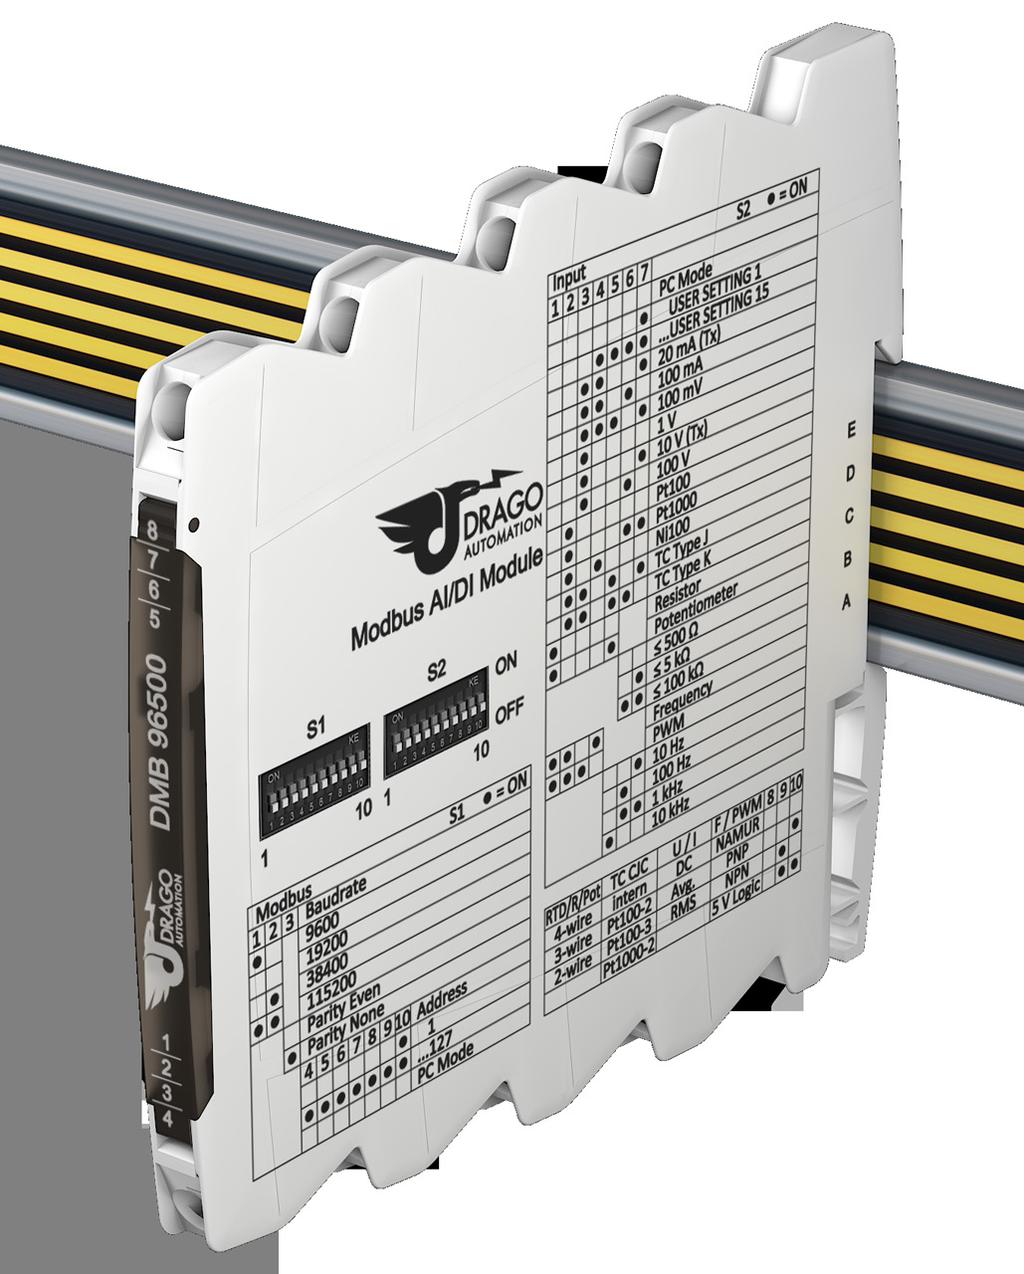 New ultra-compact Modbus RTU I/O Modules Freely scalable up to 247 units in one Modbus segment Extremely slim, only 6.